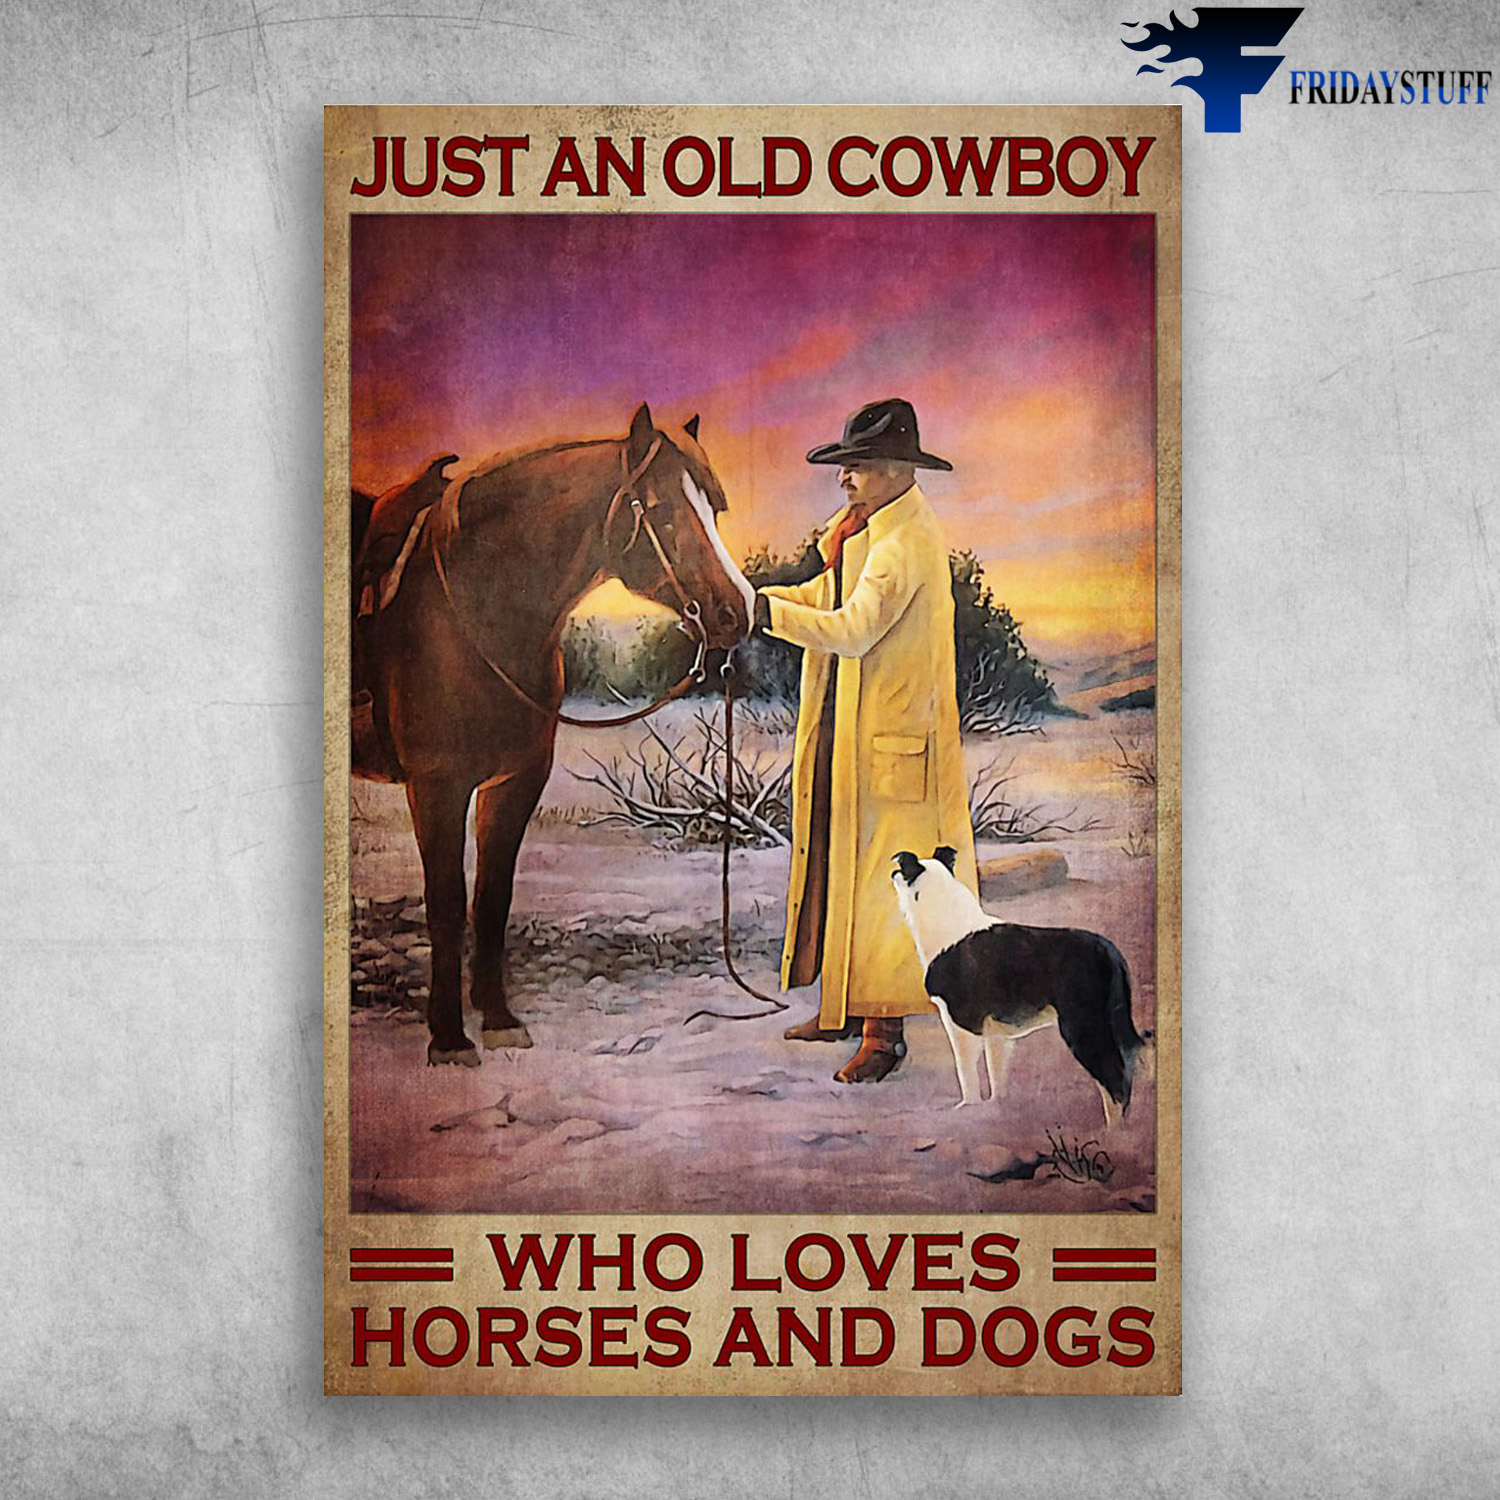 The Cowboy Loves Horses And Dogs - Just An Old Cowboy, Who Loves Horses And Dogs